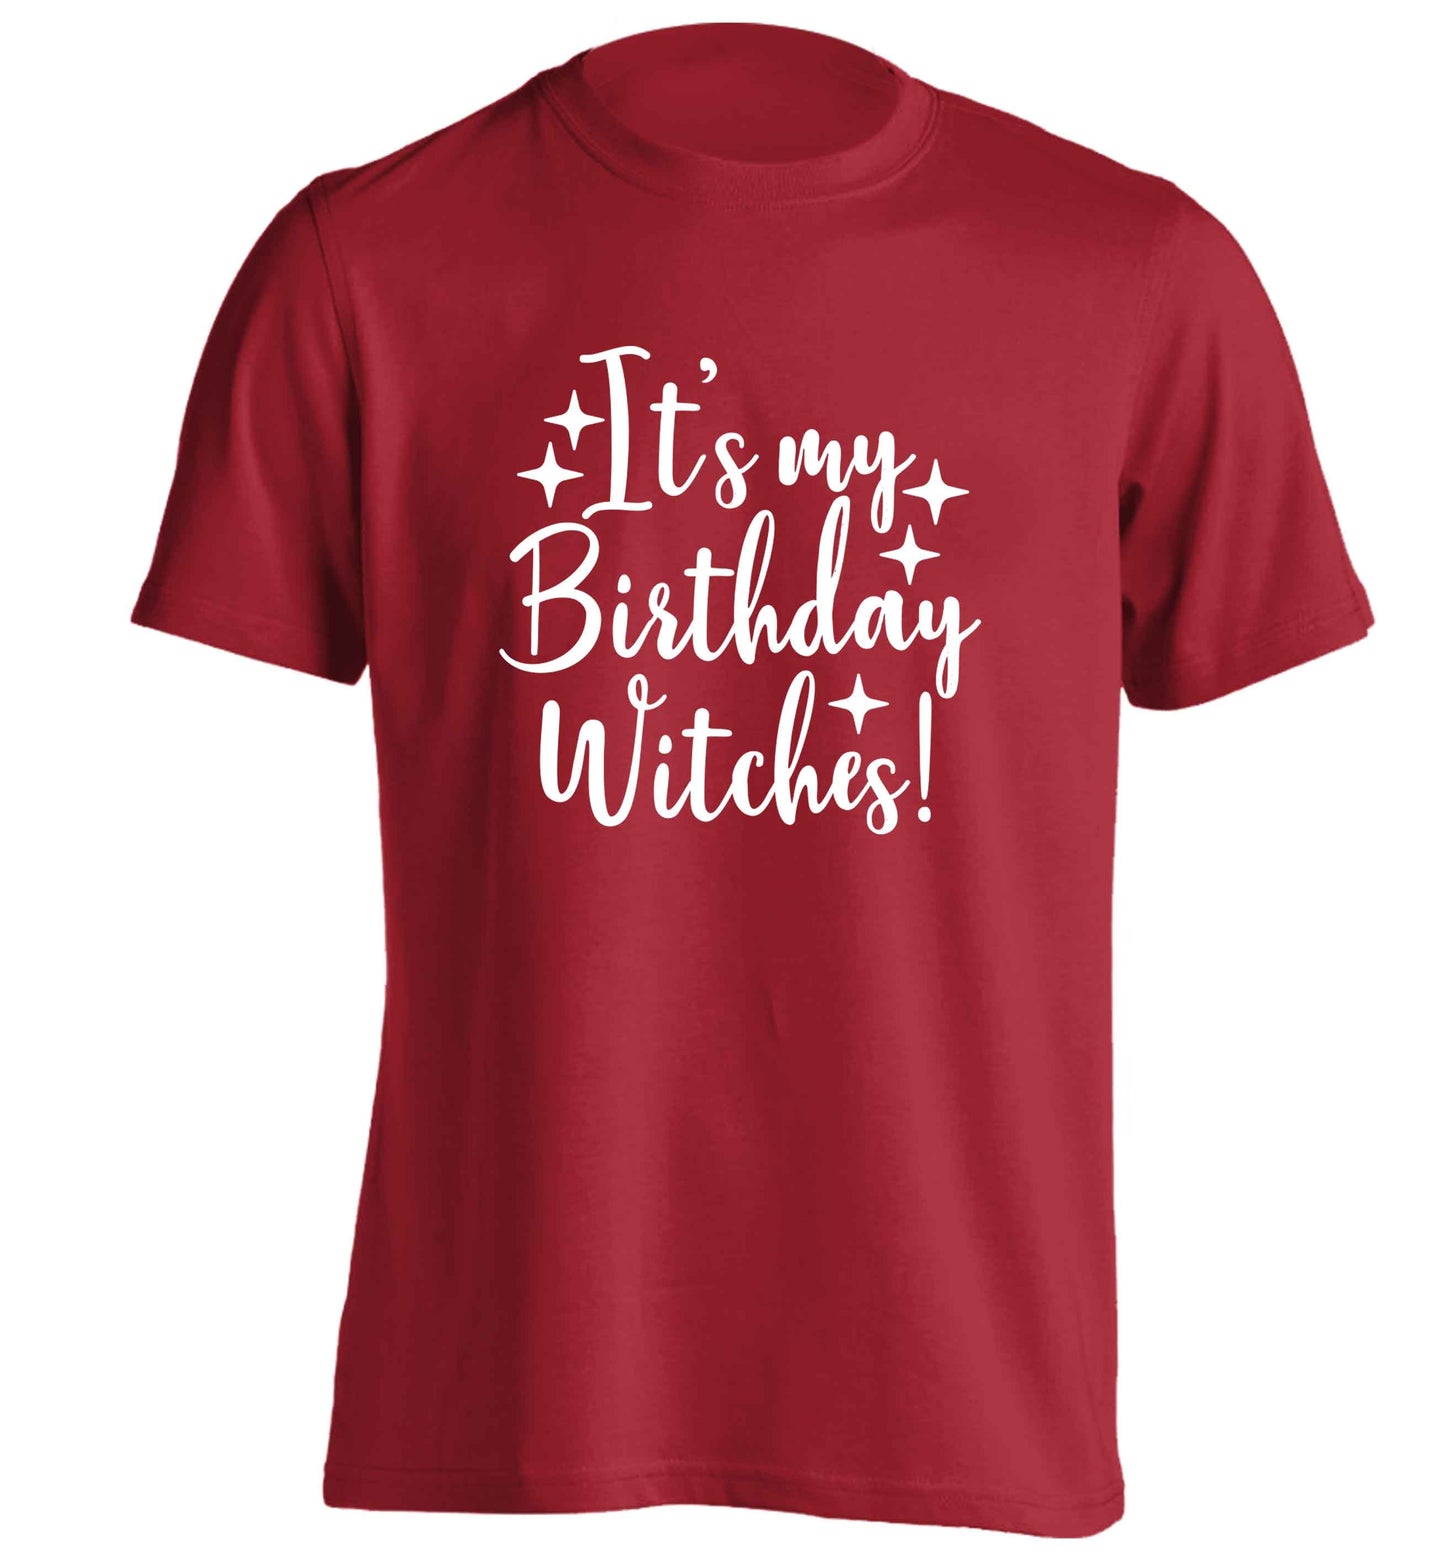 It's my birthday witches!adults unisex red Tshirt 2XL